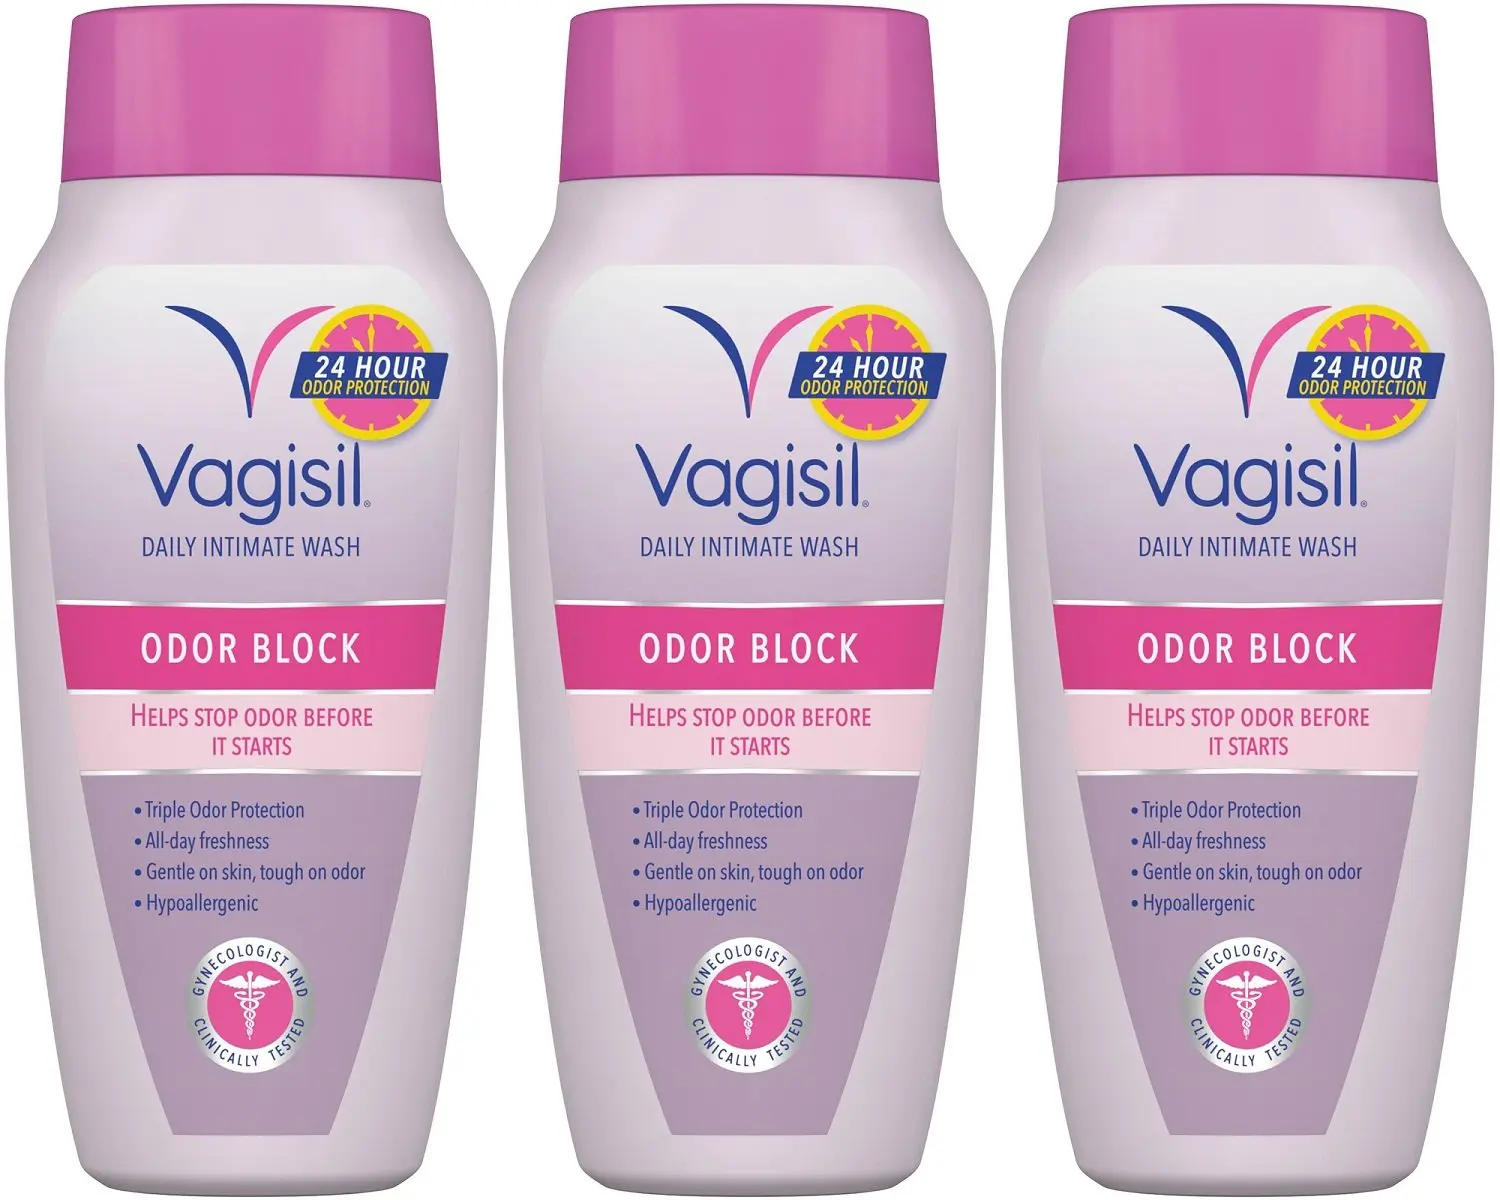 Vagisil Odor Block Daily Intimate Vaginal Wash, 12 Ounce (Pack of 3). 21.48...